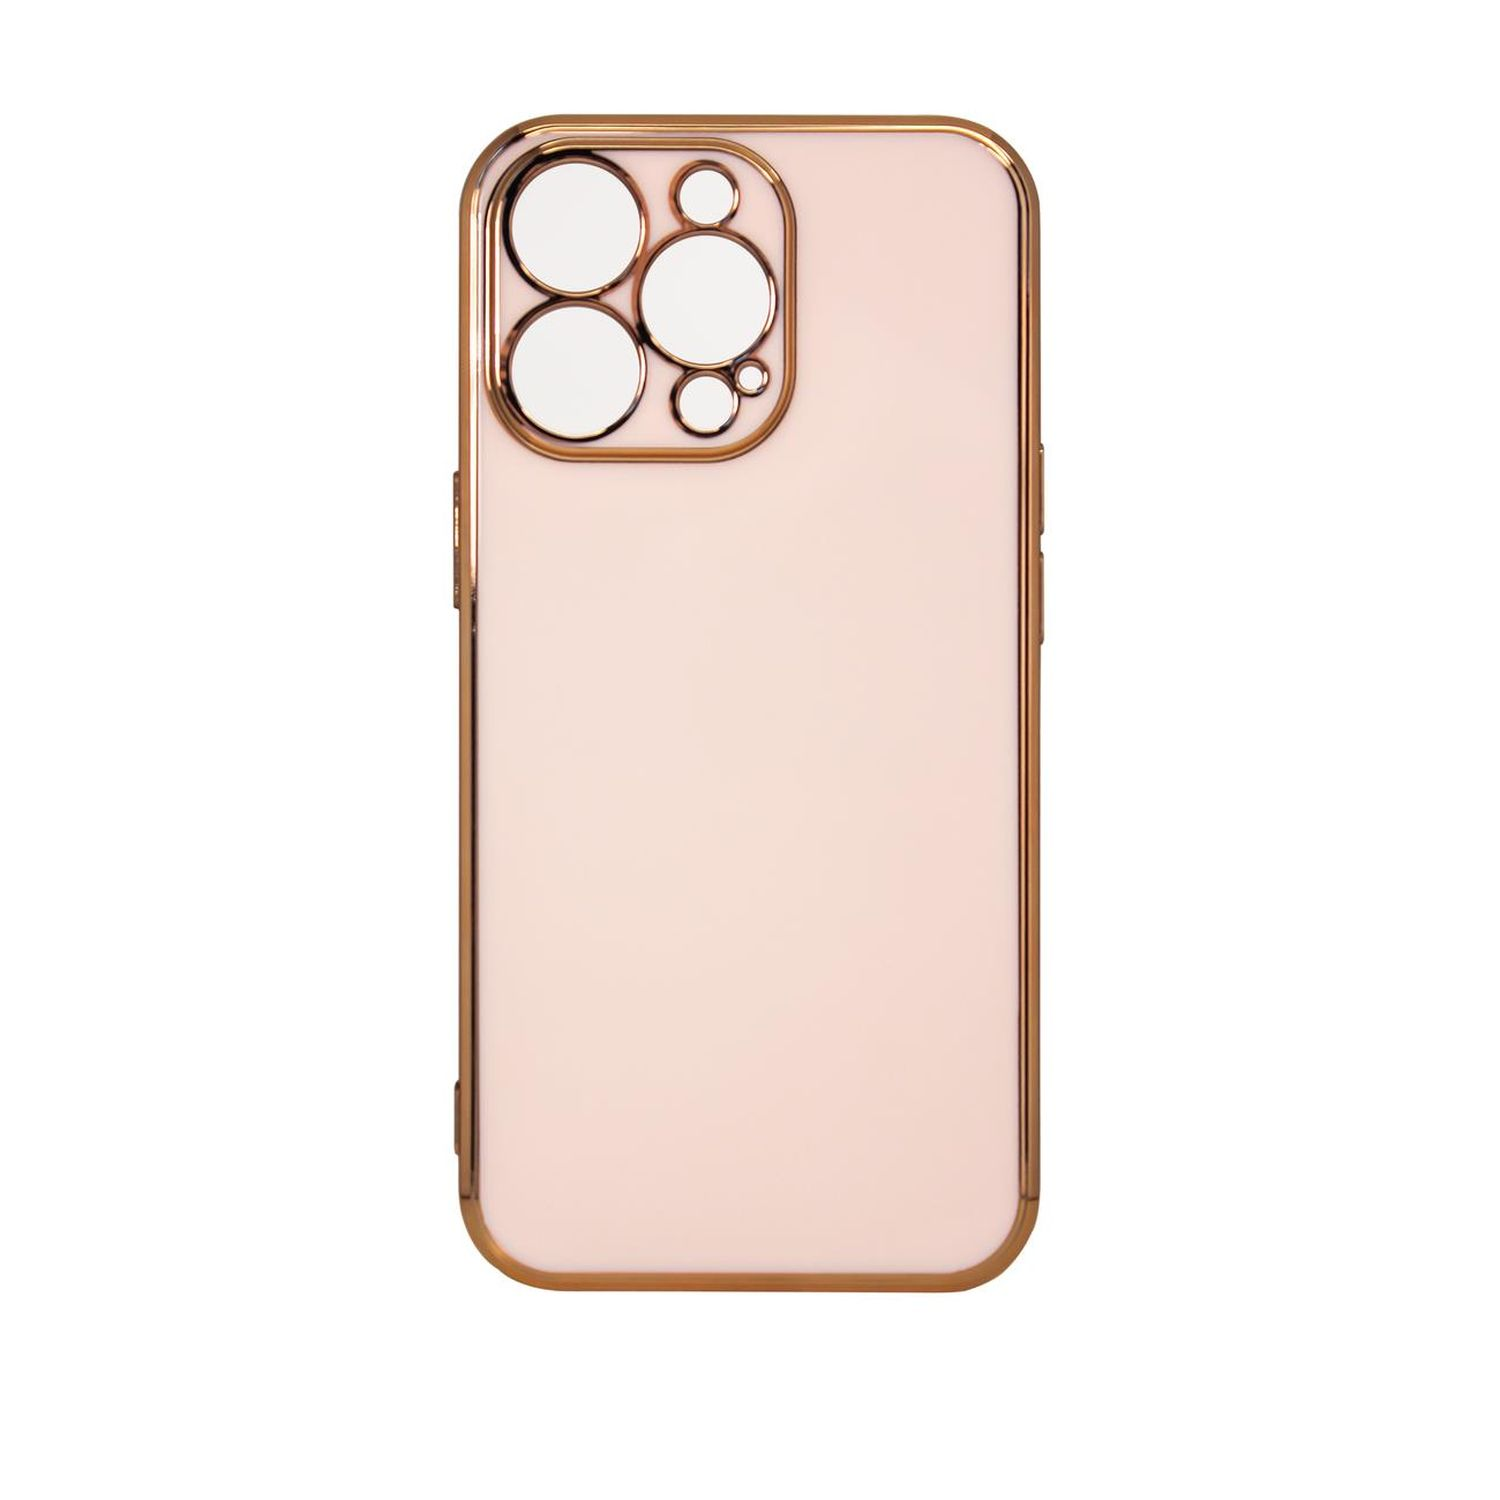 COFI Case, Apple, Color Pro 13 Lighting iPhone Pink-Gold Max, Backcover,